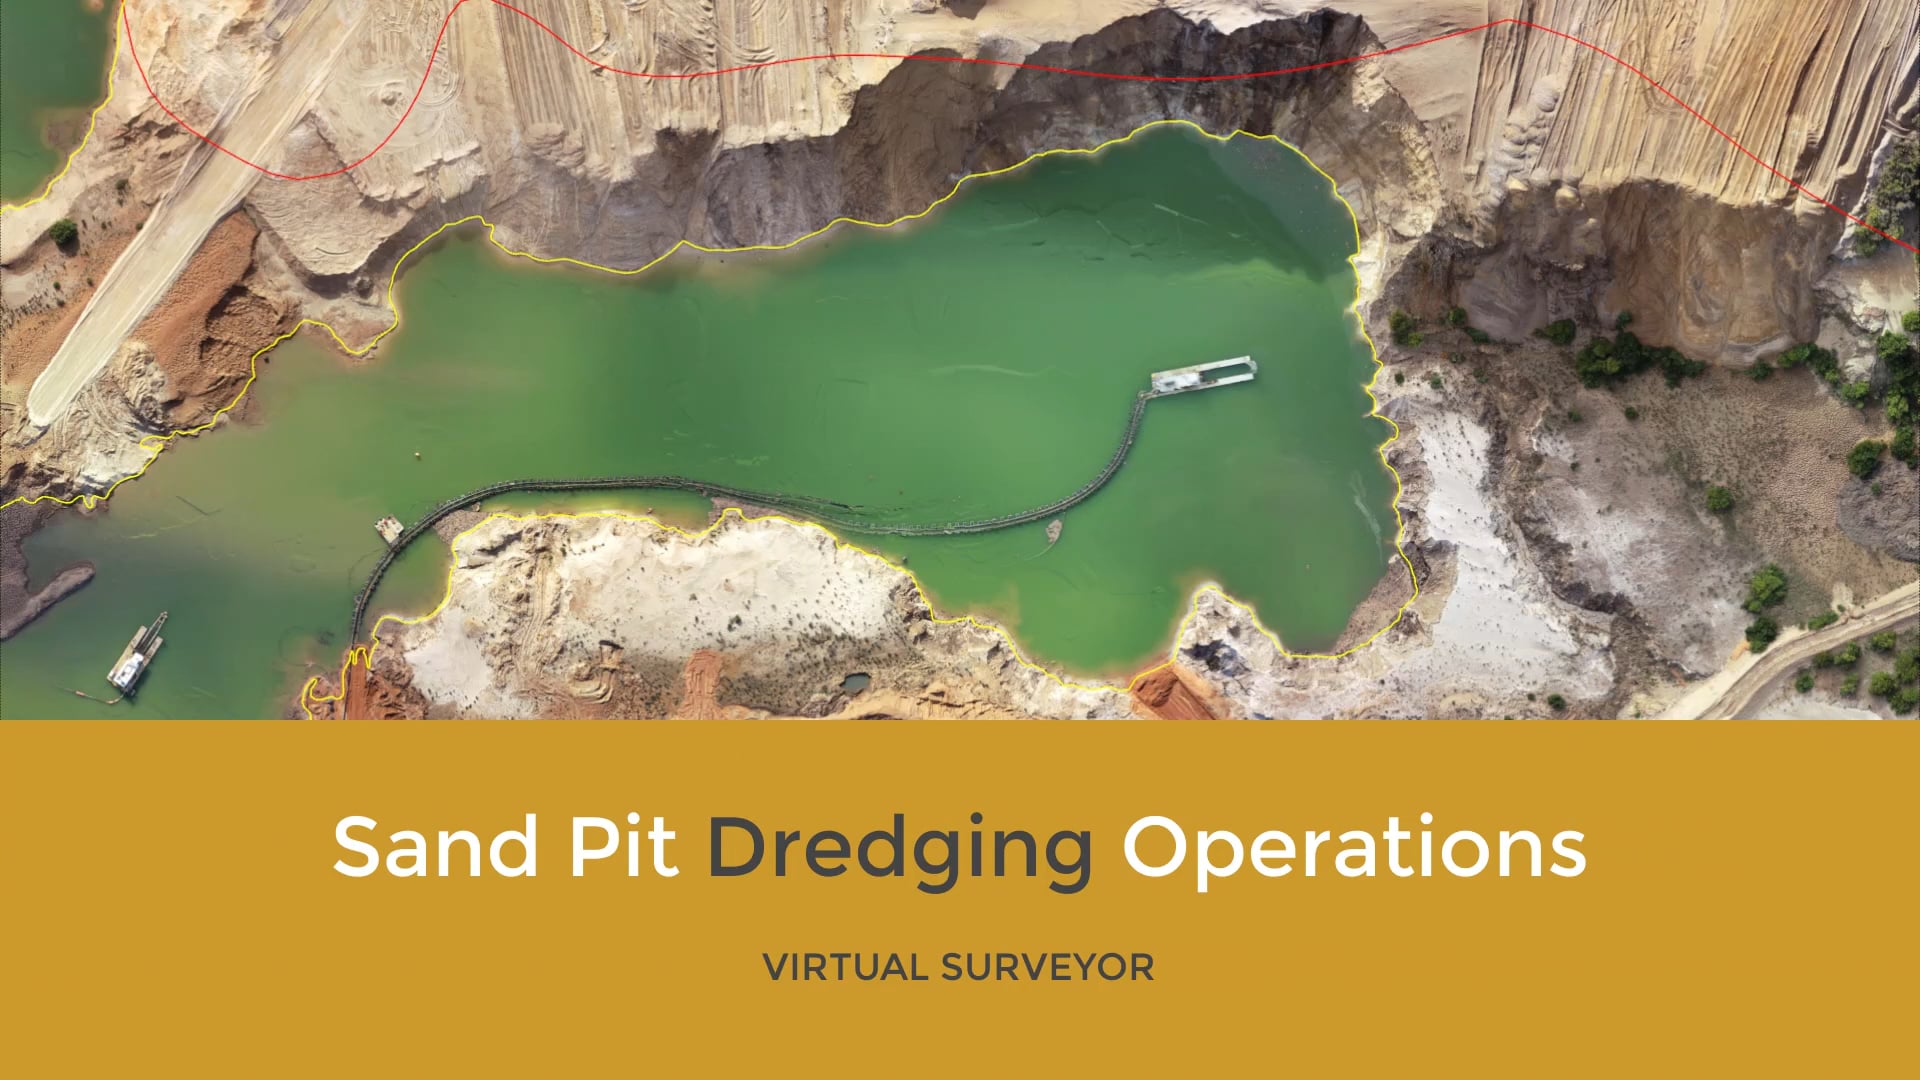 Sand Pit Dredging Operations